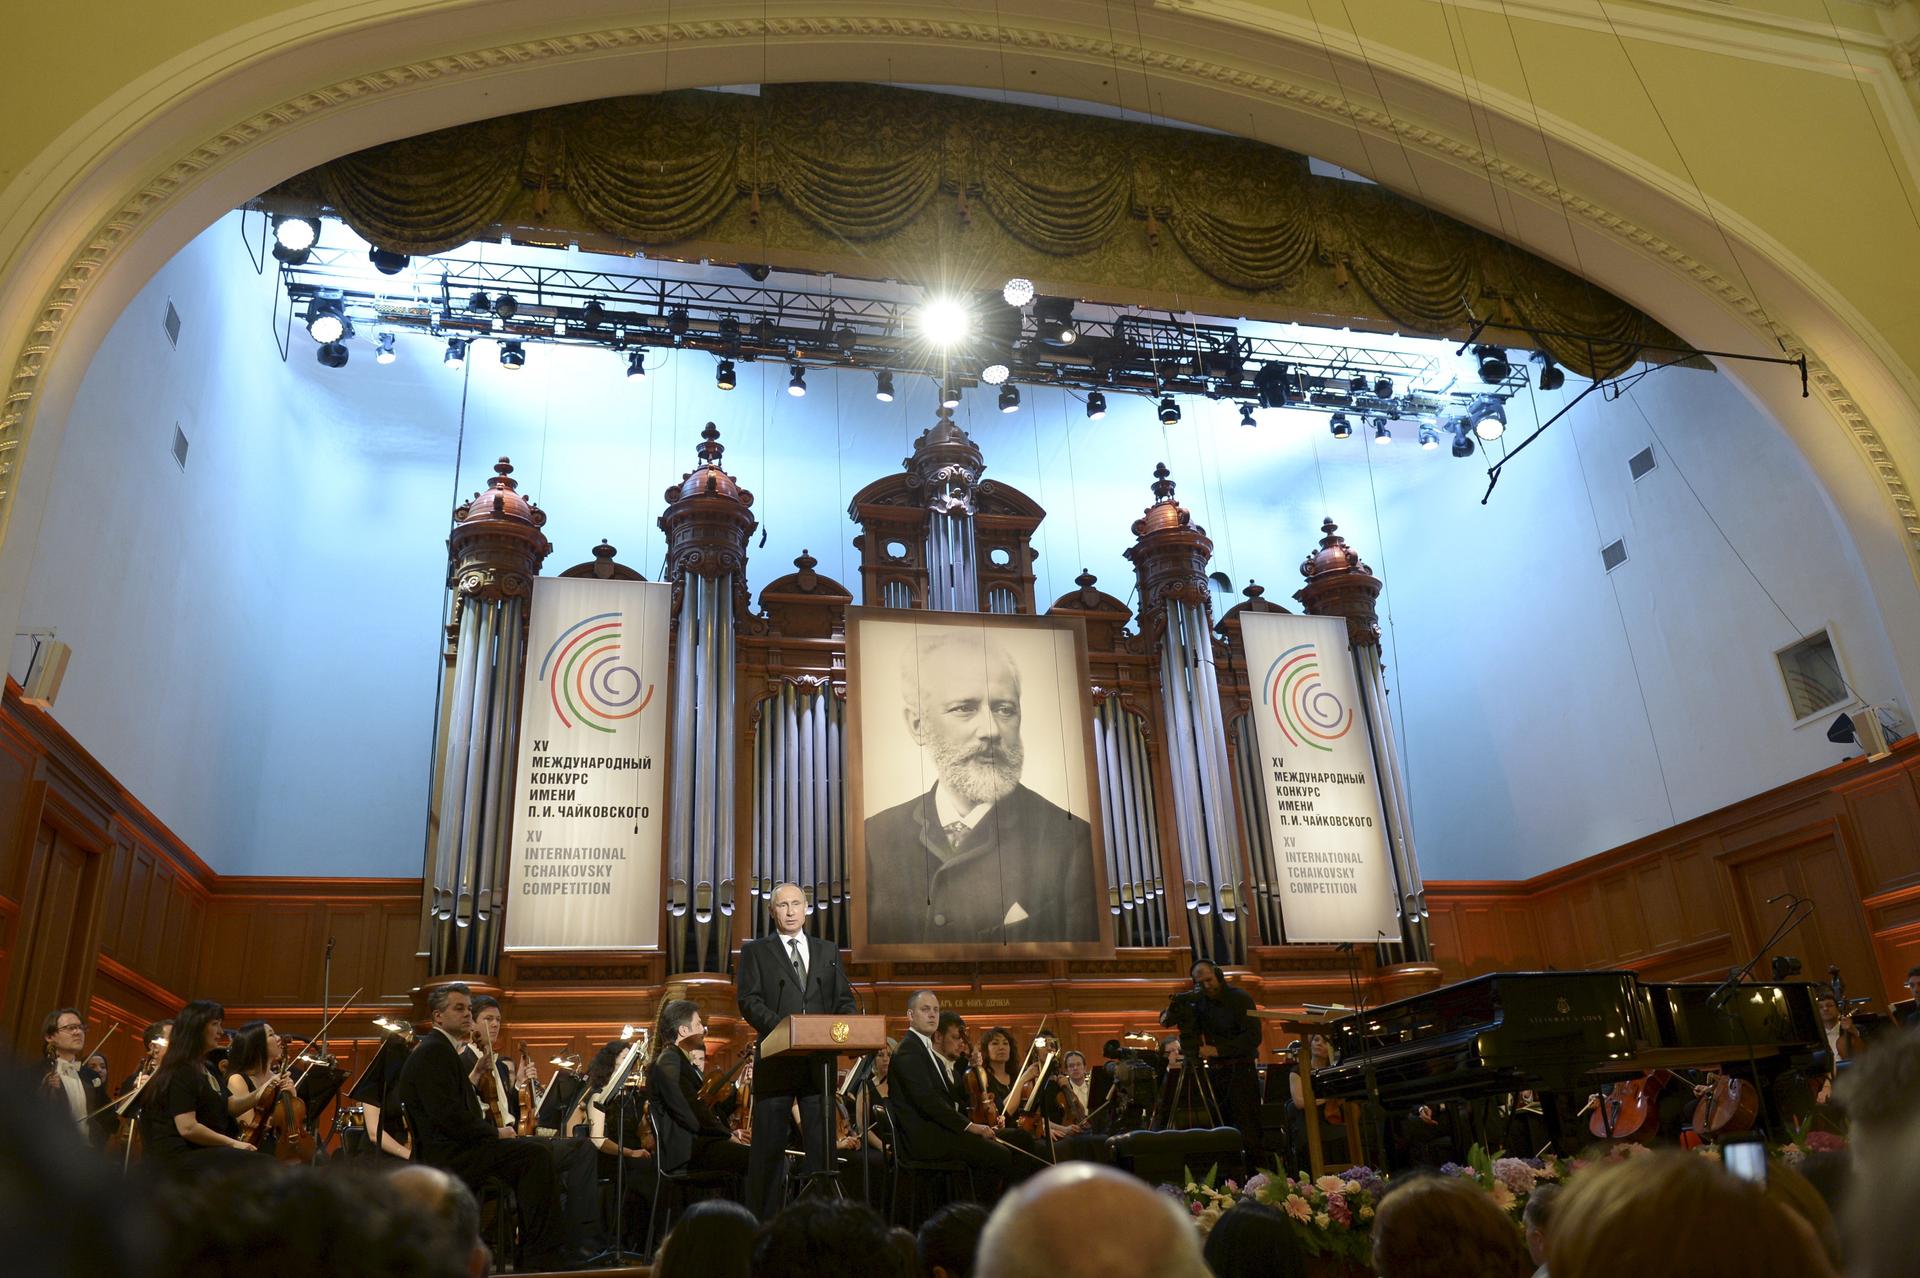 Vladimir Putin is dwarfed by a picture of Russian composer Pyotr Tchaikovsky at the gala concert of the 15th International Tchaikovsky Competition at the Moscow Conservatory on July 2nd. The Russian President addressed the crowd describing the competition